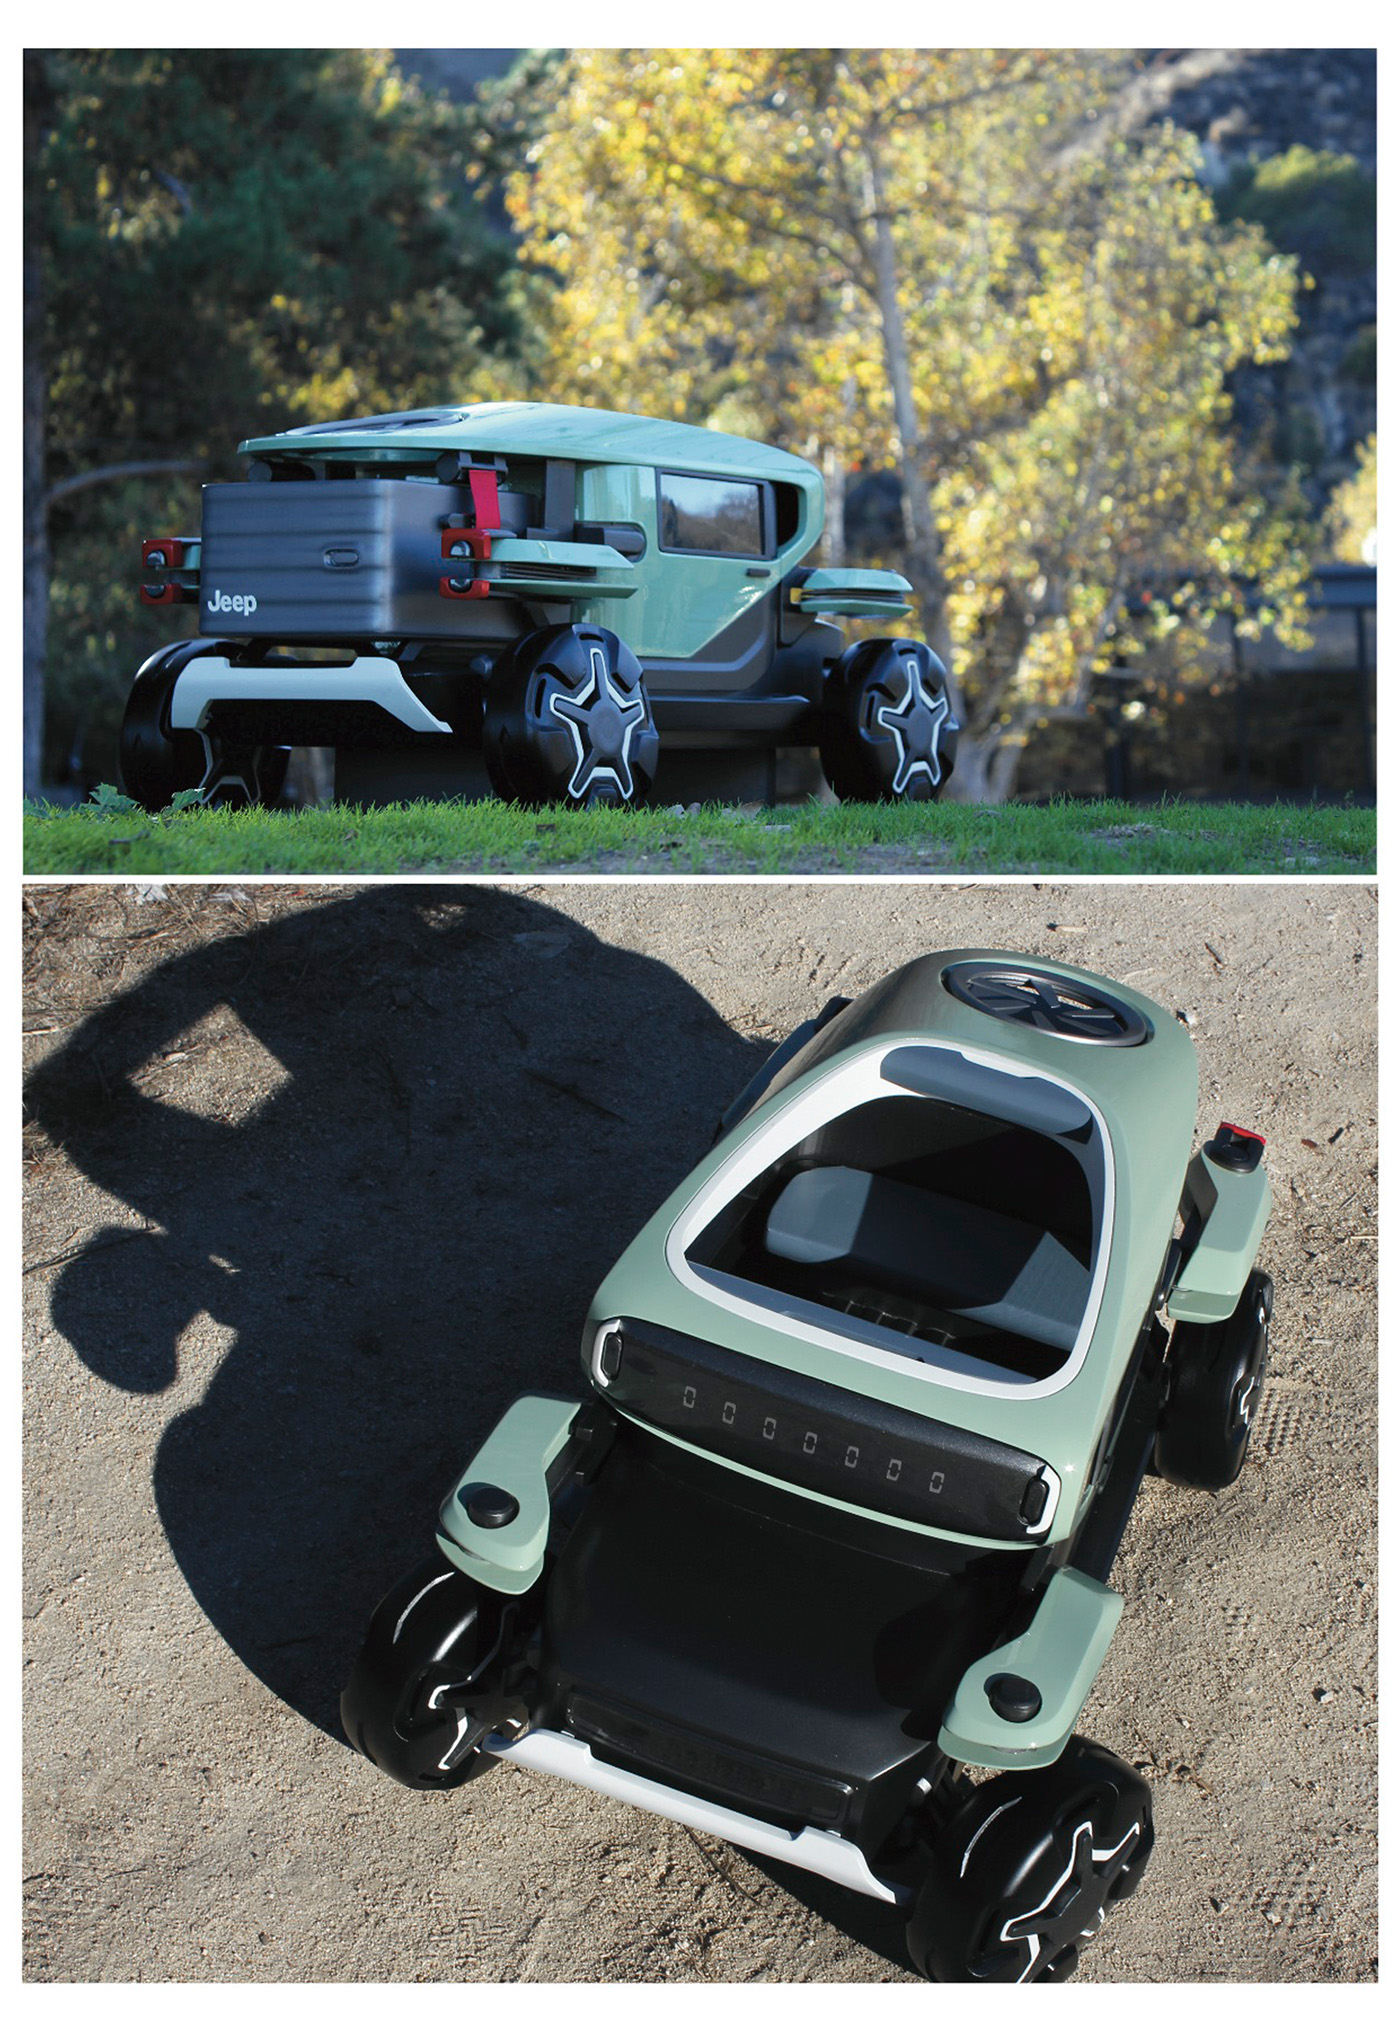 drone Flying cargo Sky Deck Autonomous sharing jeep 2 seater Off-Roader